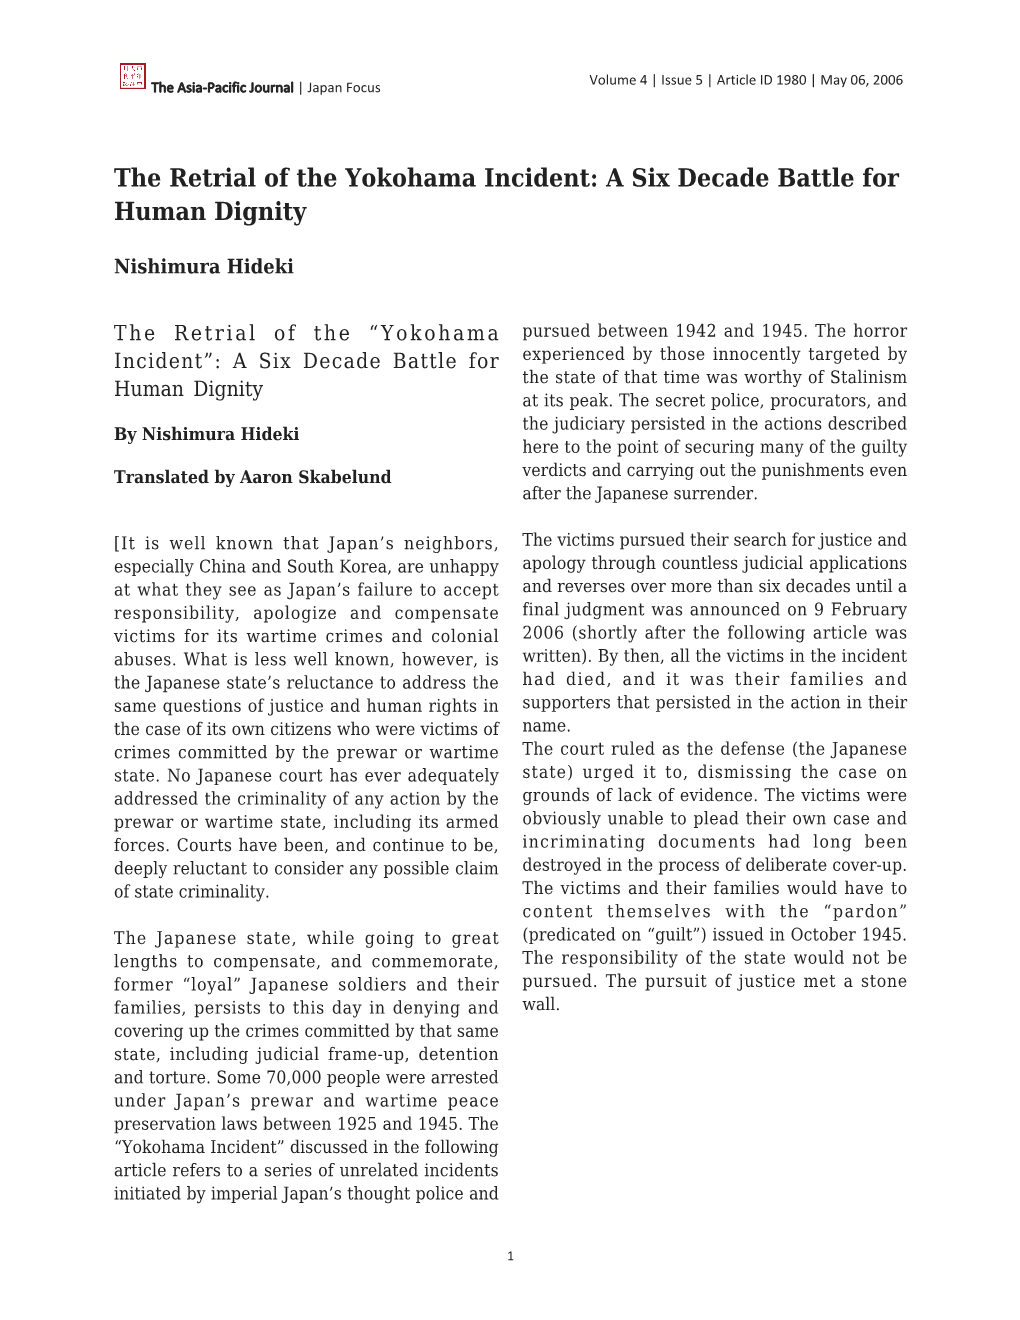 The Retrial of the Yokohama Incident: a Six Decade Battle for Human Dignity